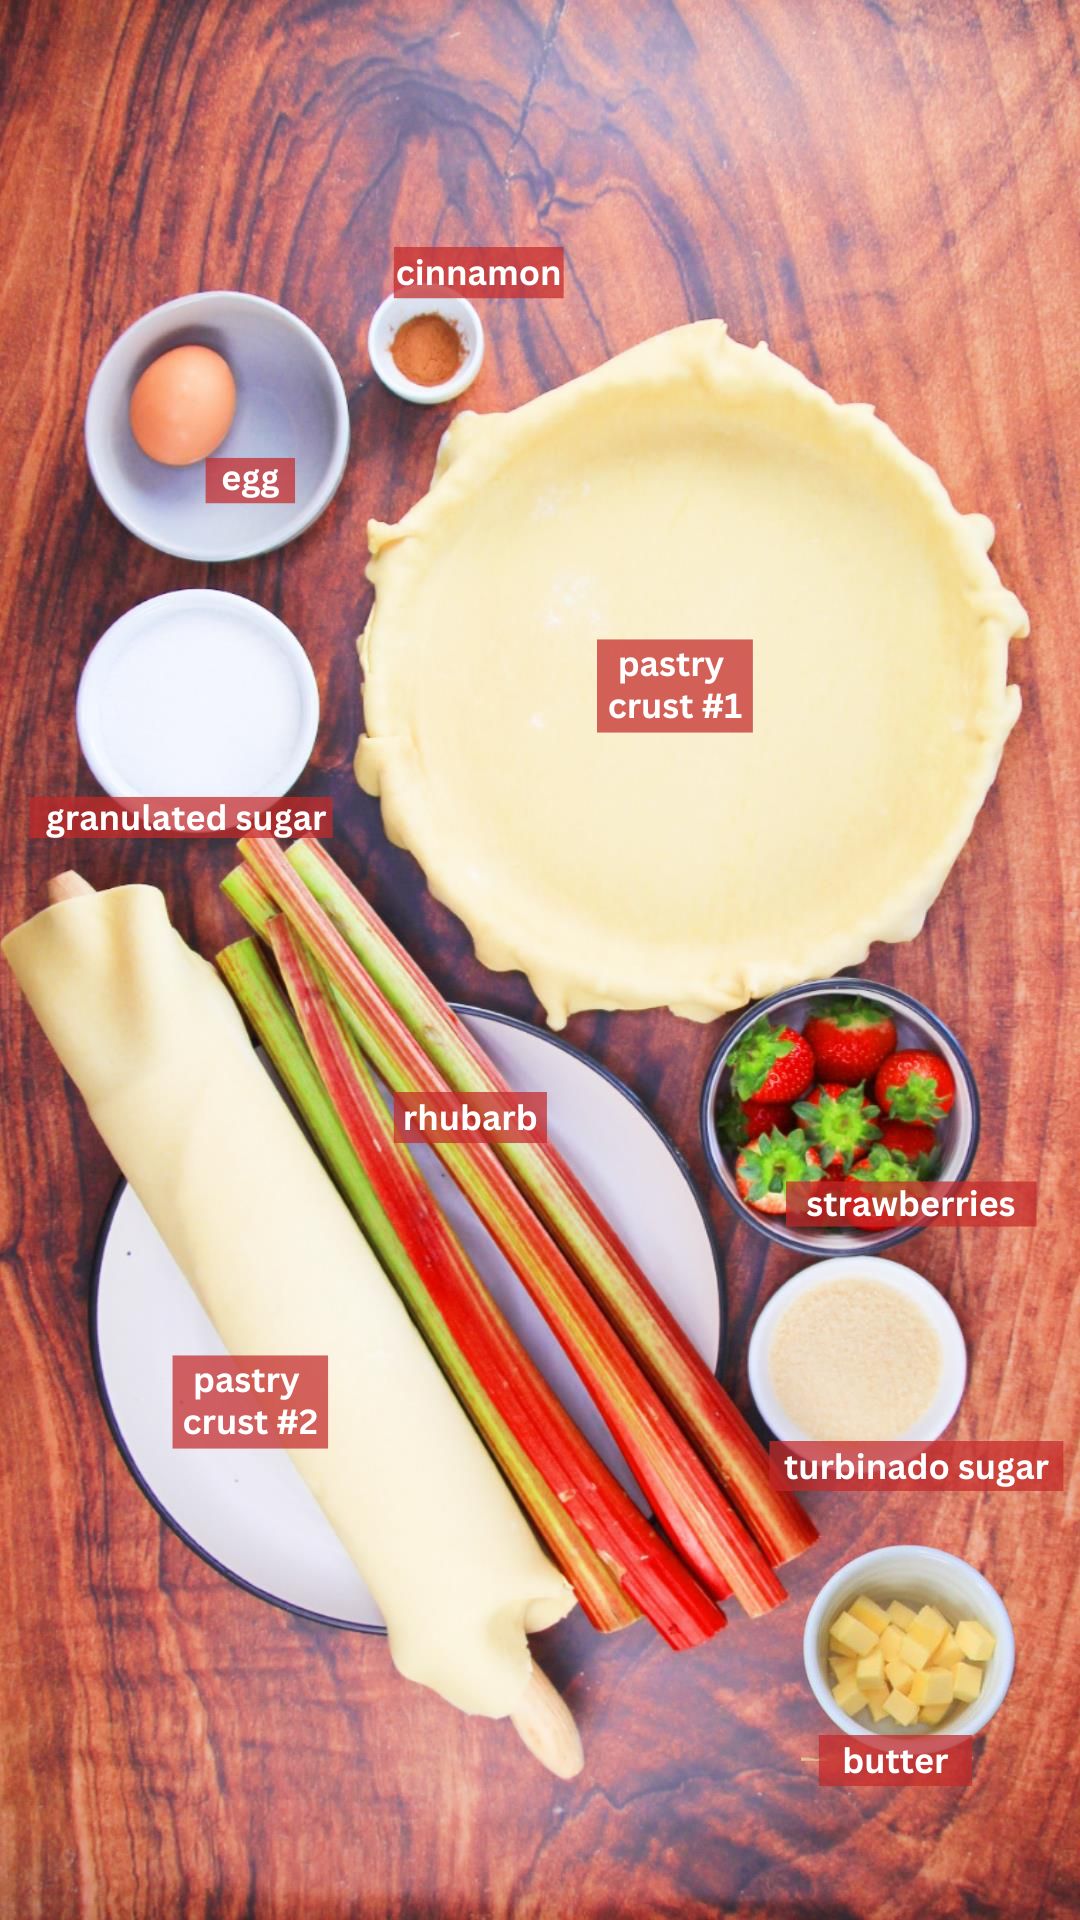 Top down view of rhubarb strawberry pie ingredients including rhubarb, strawberries, pastry crust, sugar, butter, cinnamon and an egg. Hostess At Heart